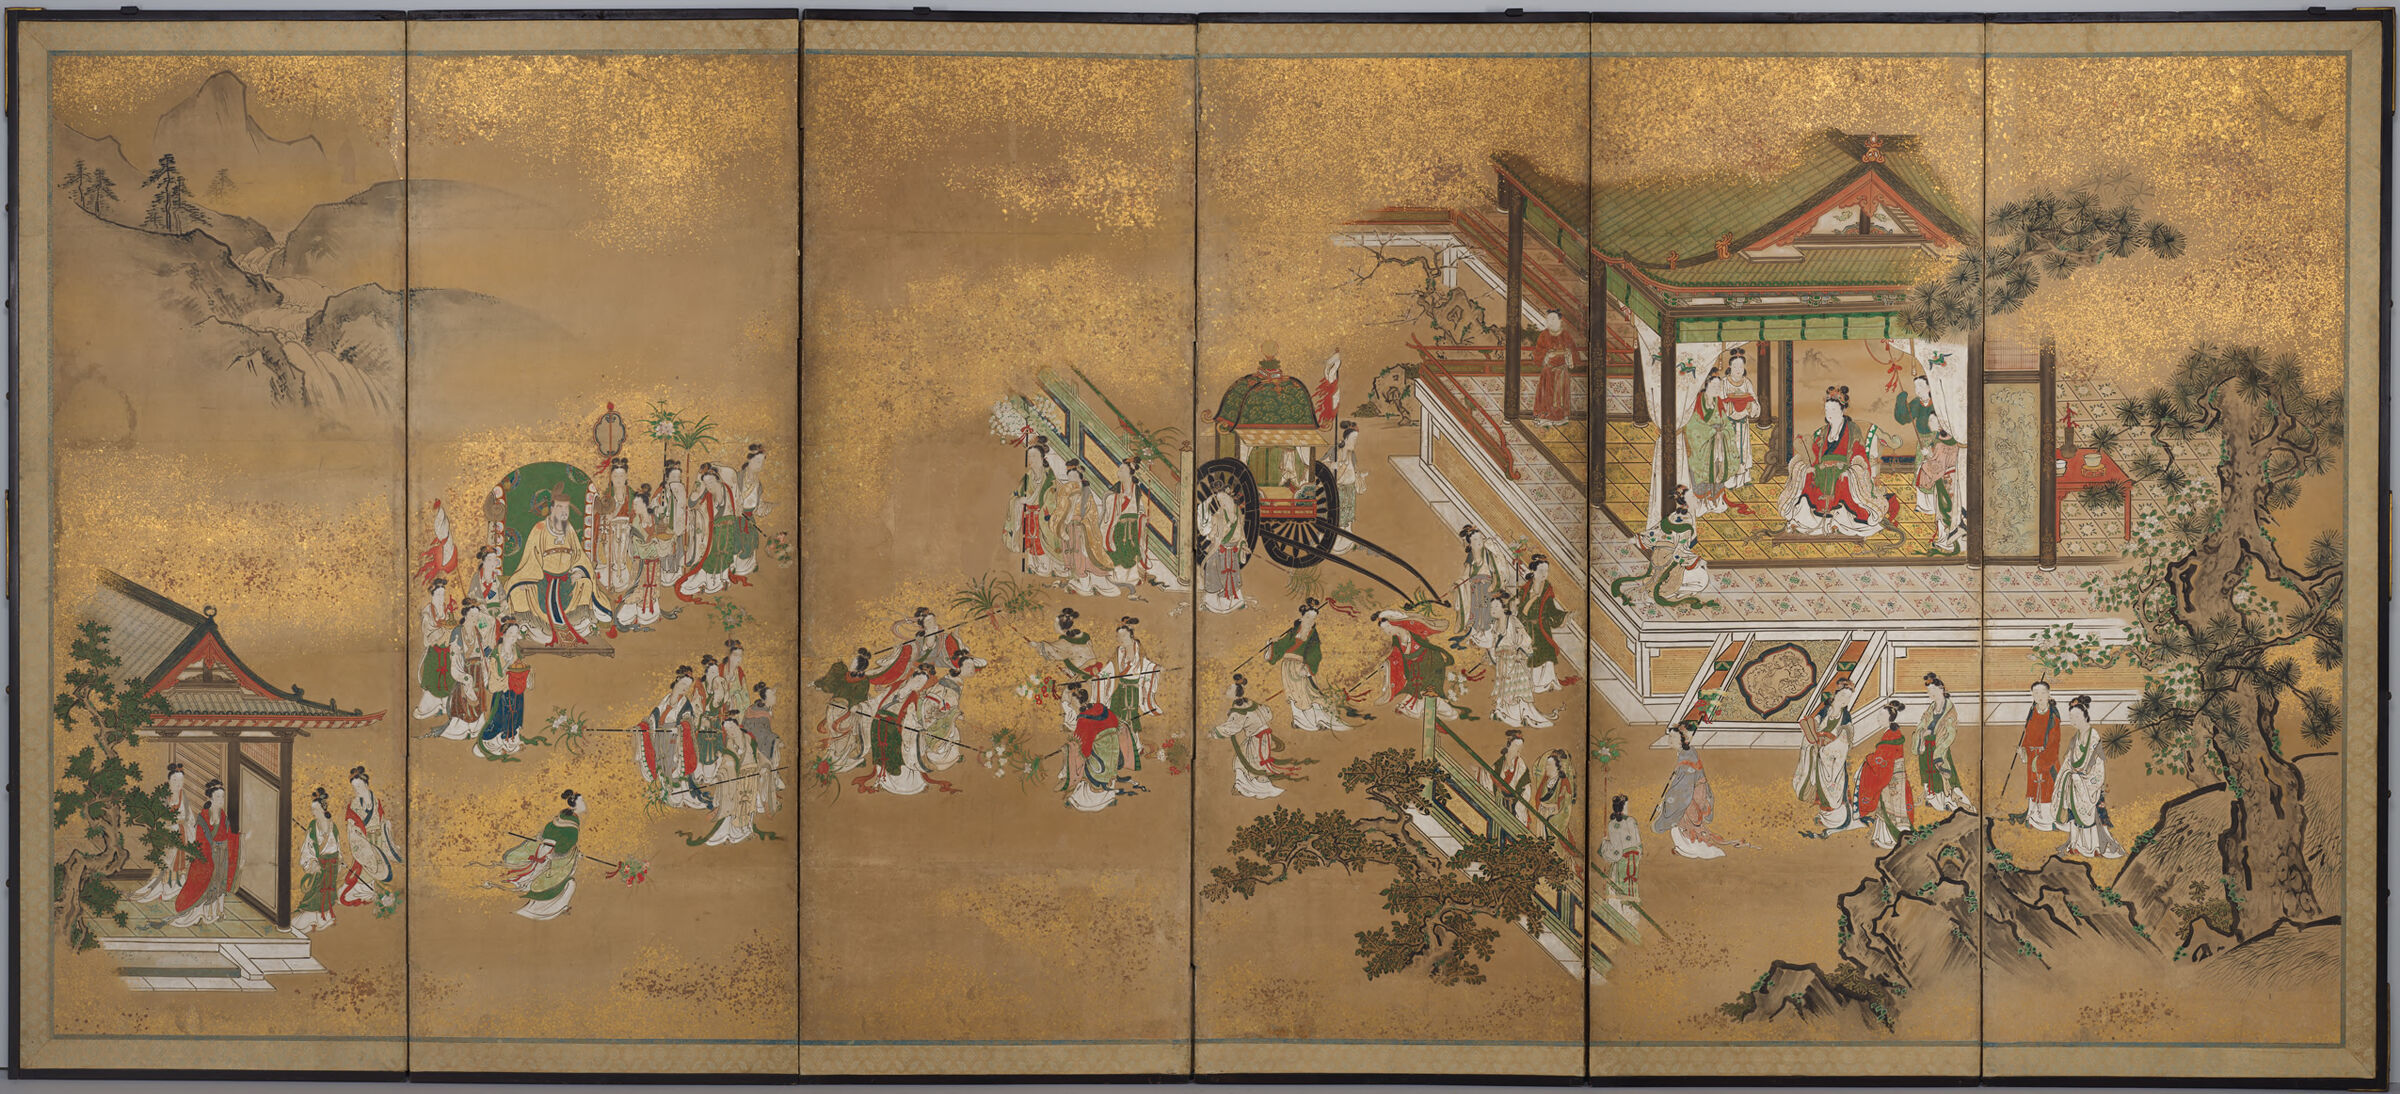 Illustrated Mirror Of Emperors And Song Of Everlasting Sorrow